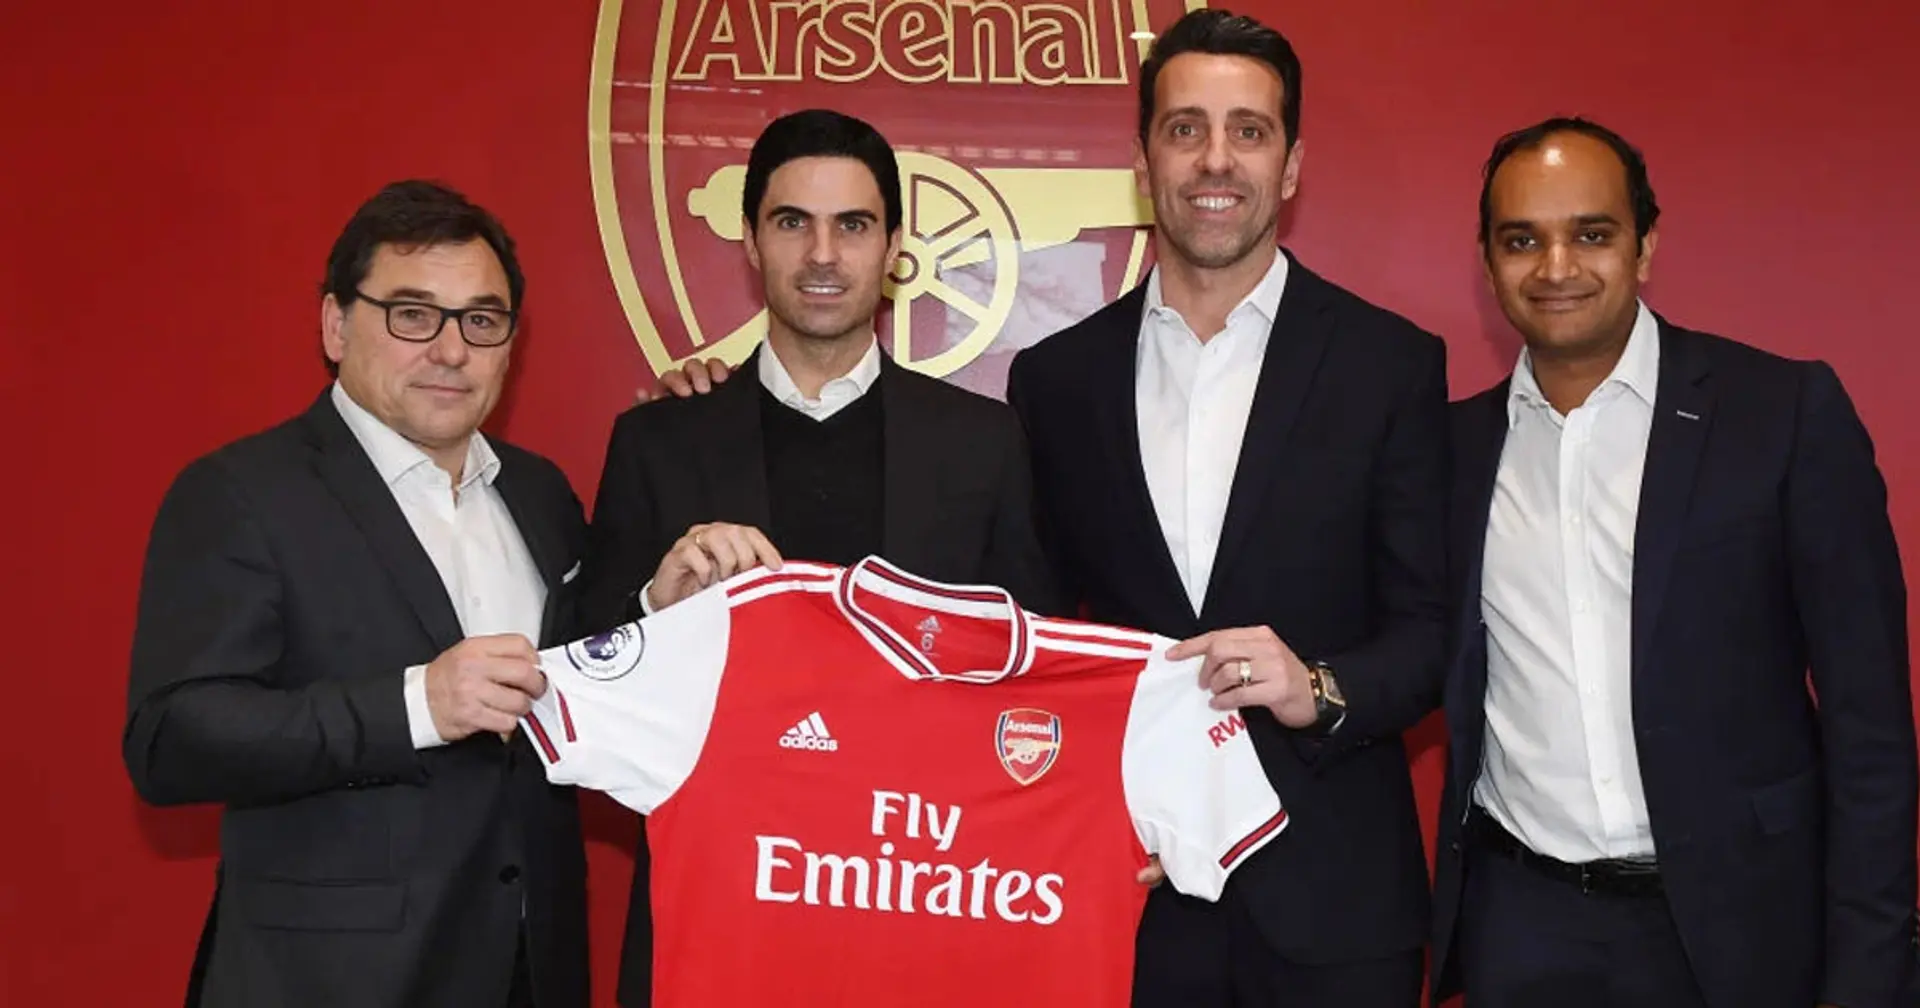 Raul Sanllehi criticizes Arsenal for giving Arteta more power & 3 big stories you might've missed